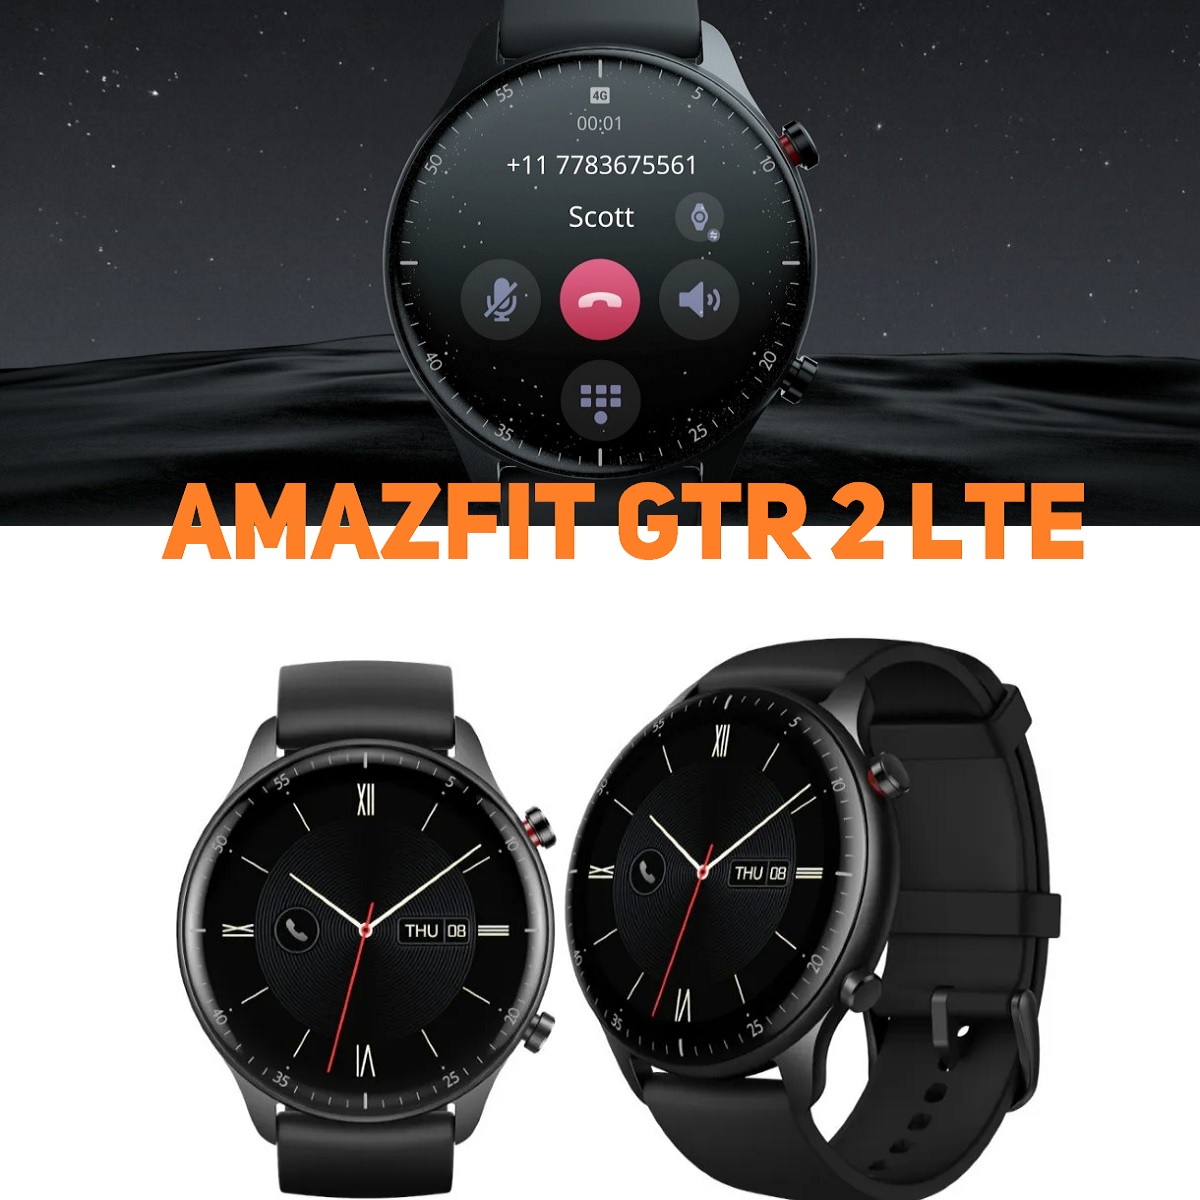 Amazfit GTR 2 LTE with calling support goes official; coming to major markets soon